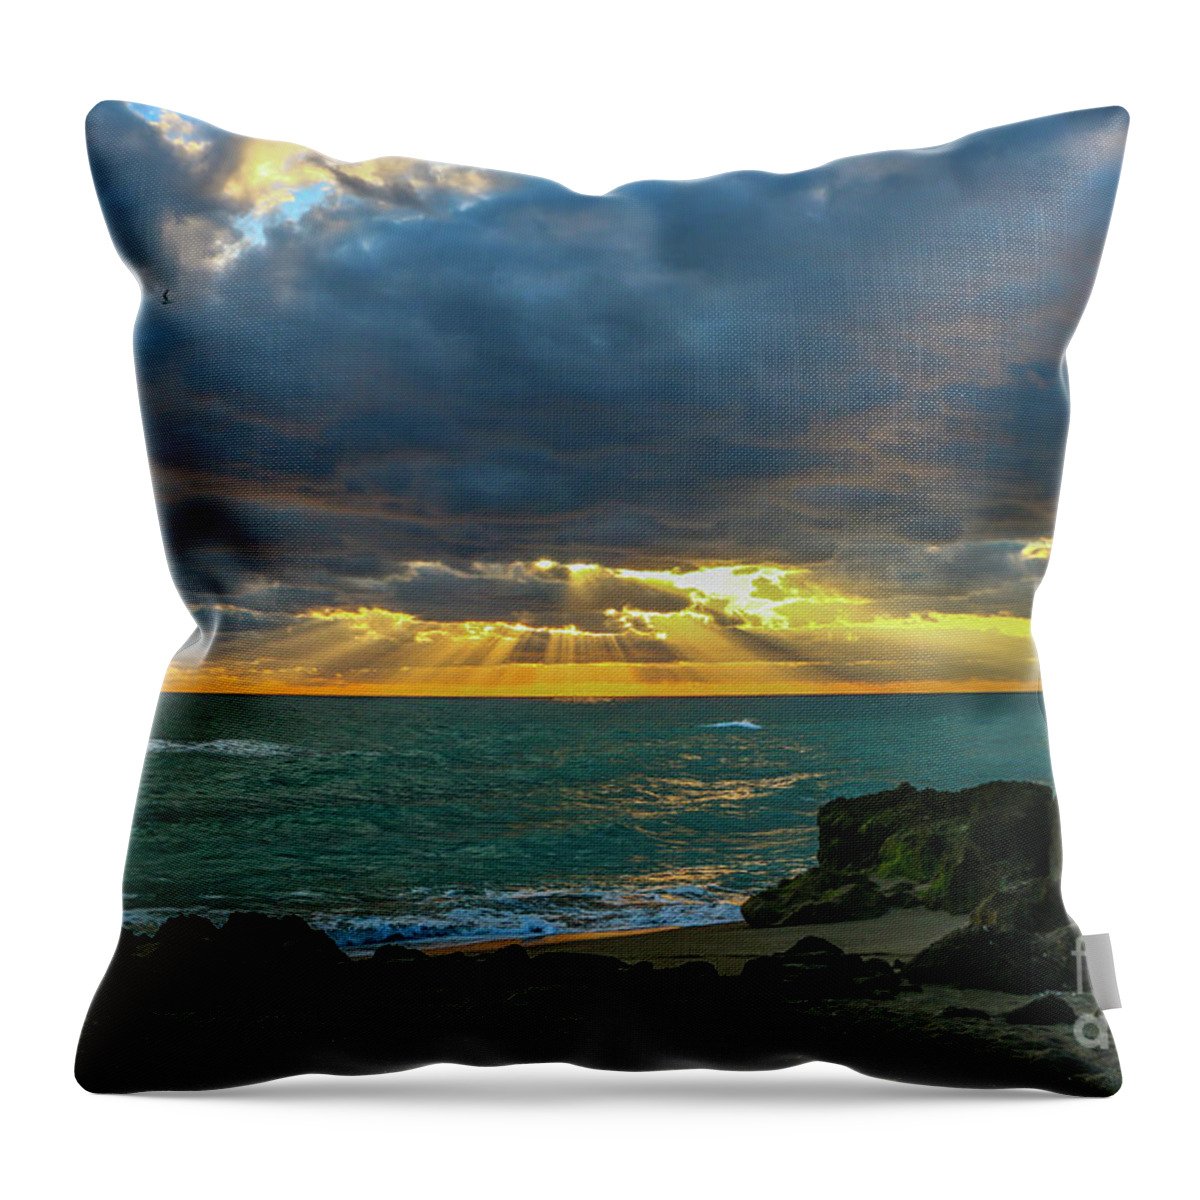 Dawn Throw Pillow featuring the photograph Cloudy Morning Rays by Tom Claud